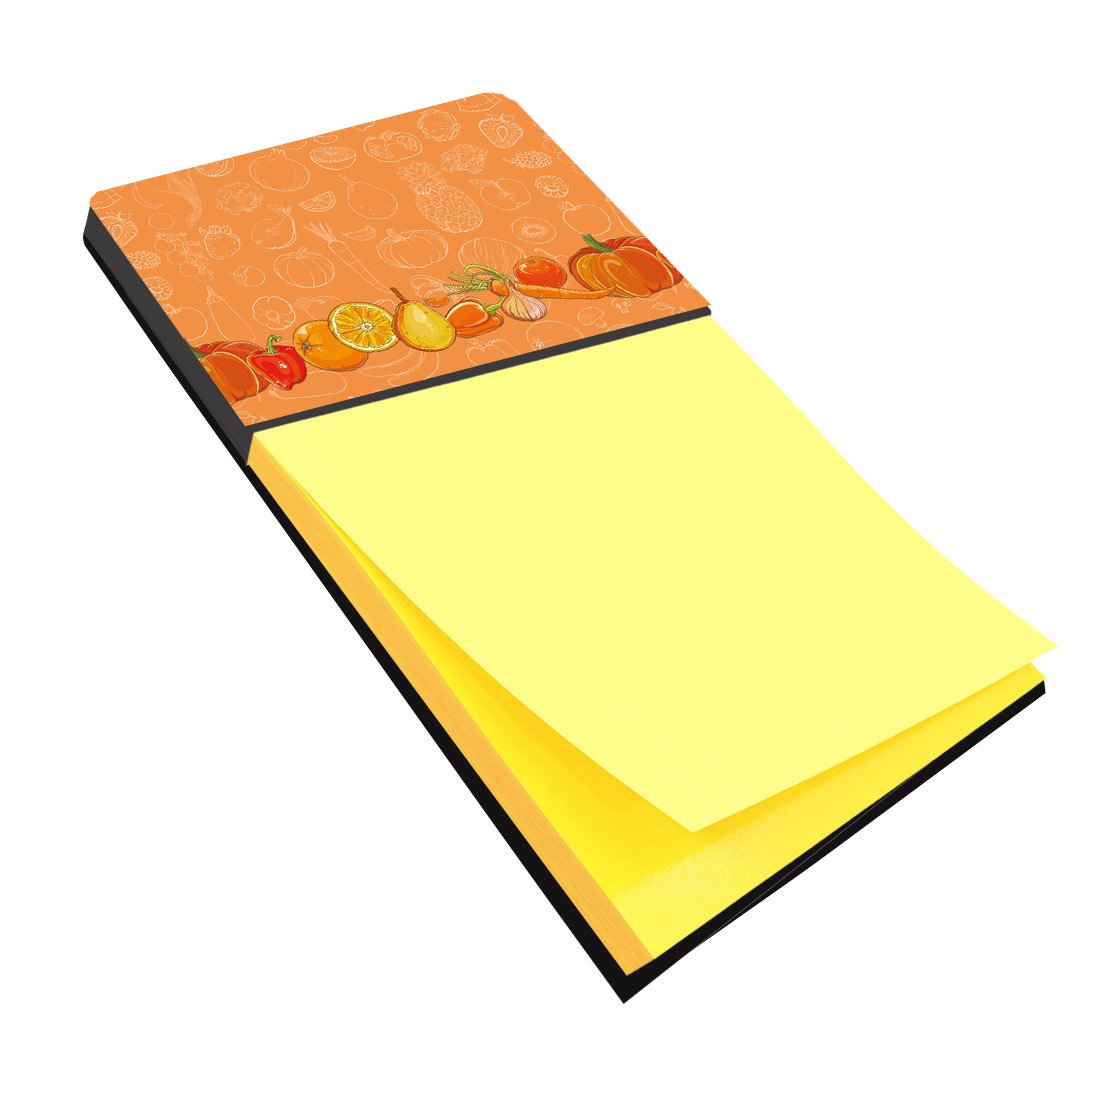 Fruits and Vegetables in Orange Sticky Note Holder BB5131SN by Caroline's Treasures